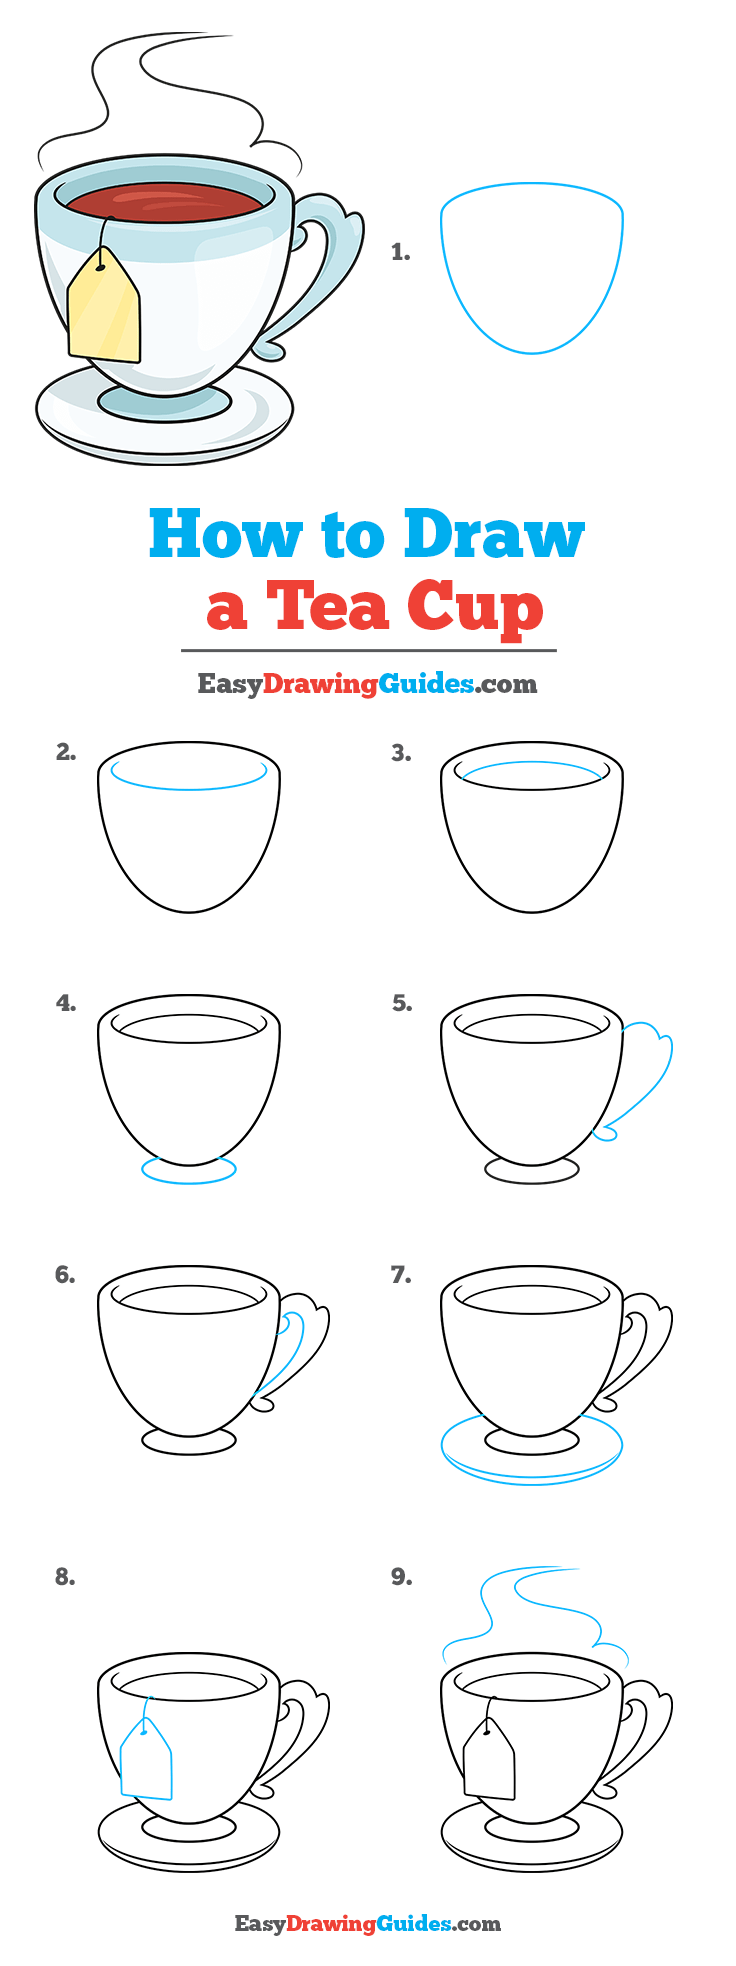 How To Draw A Tea Cup